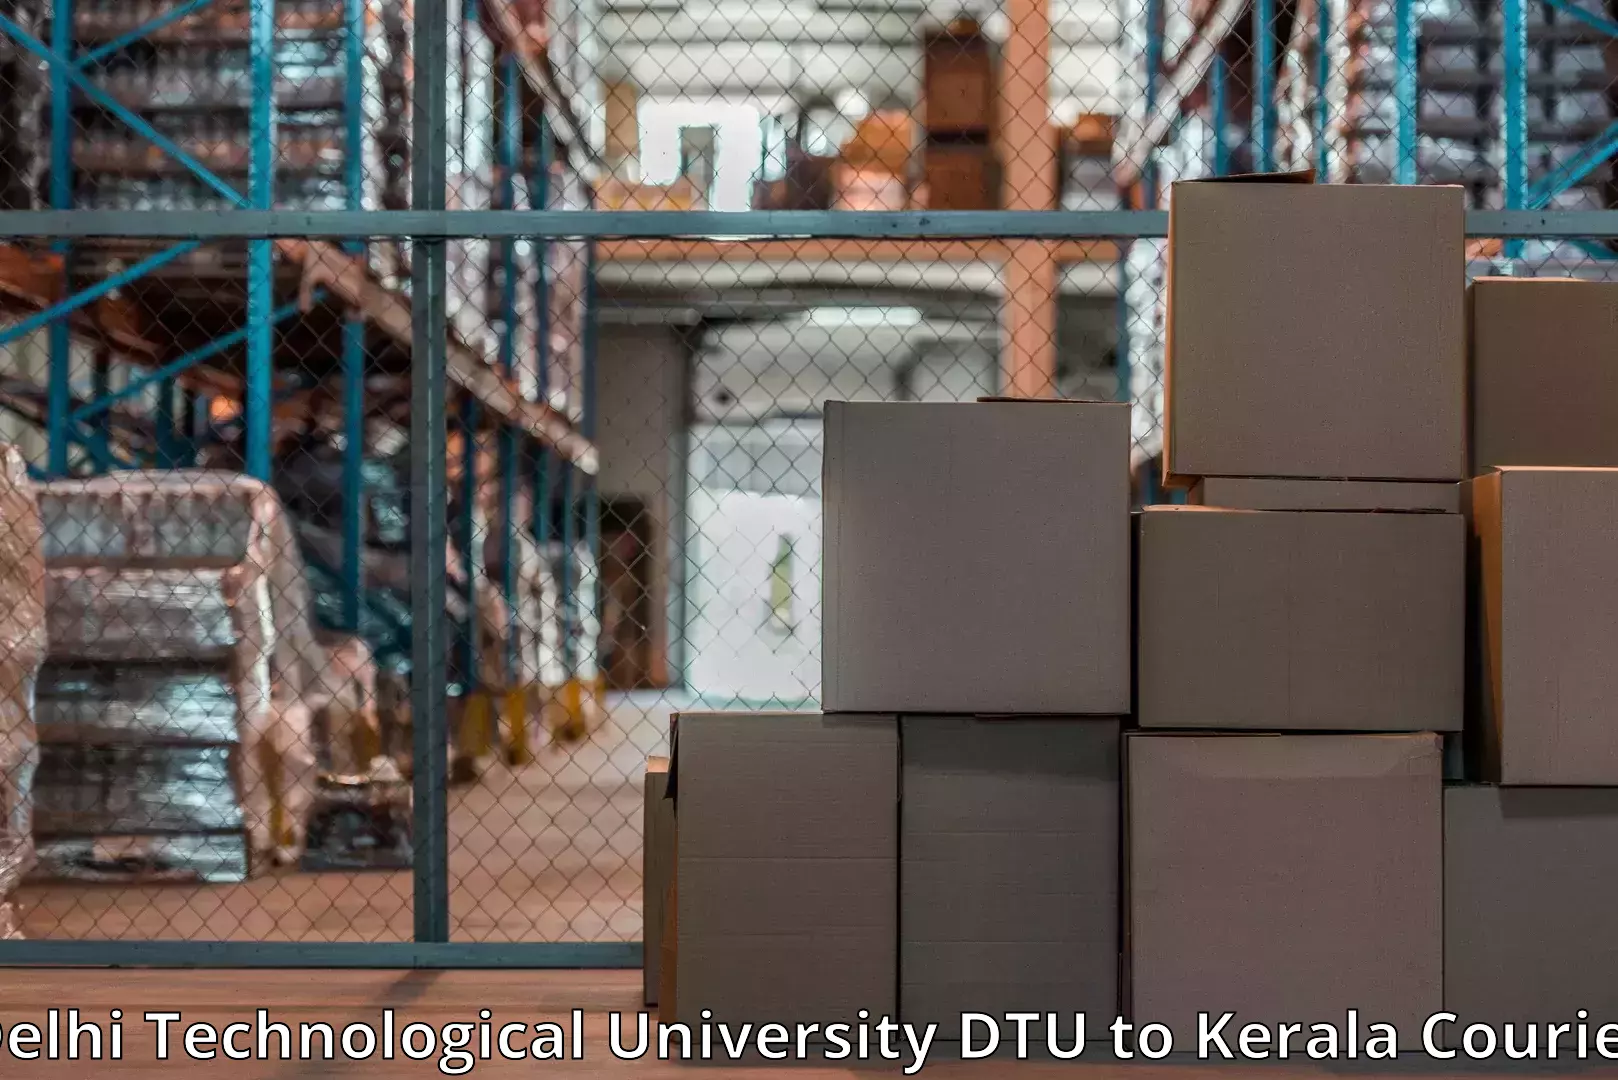 Professional home goods shifting in Delhi Technological University DTU to Rajamudy